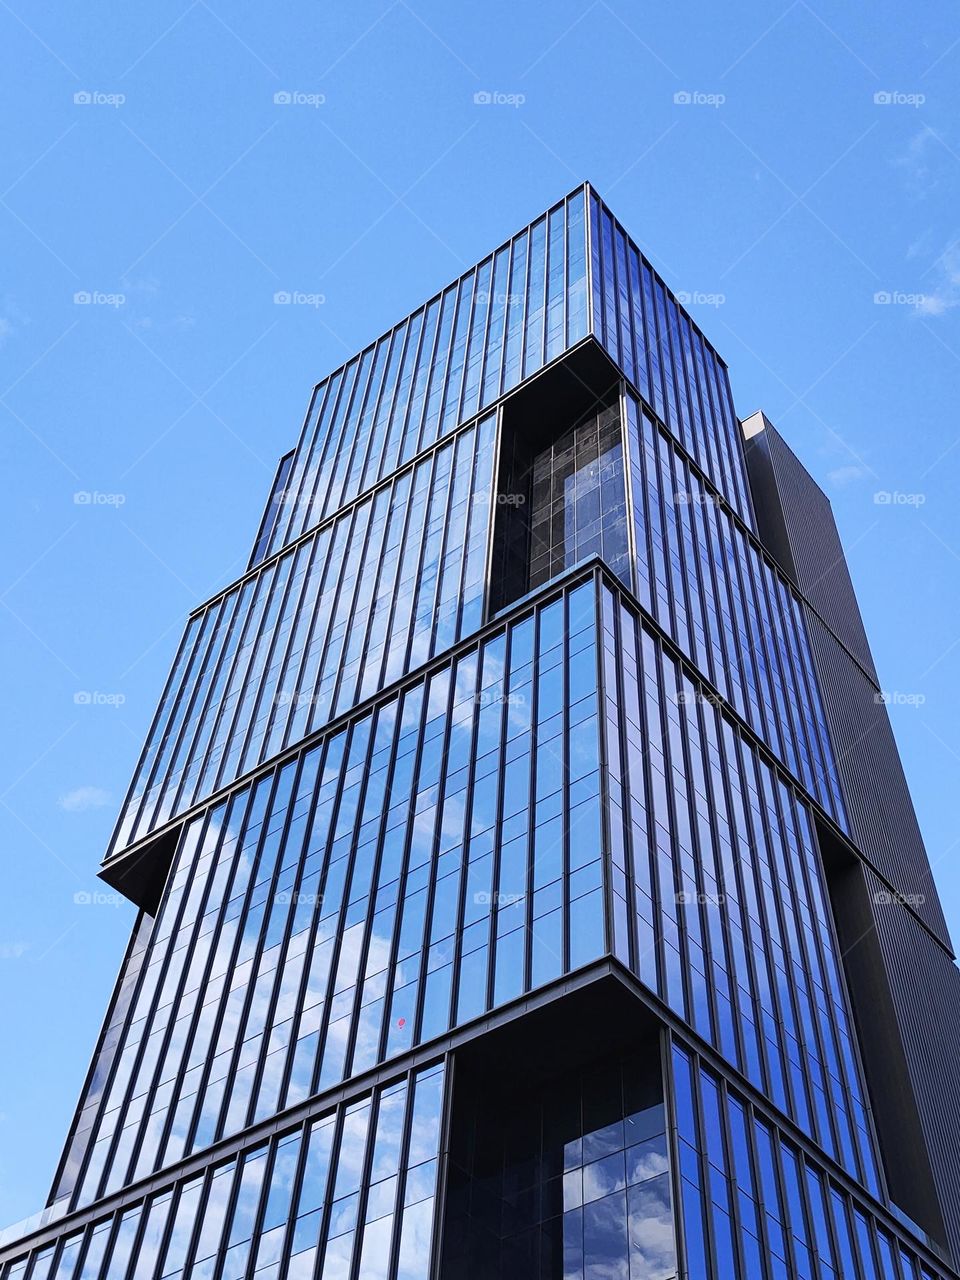 Reflections in modern building